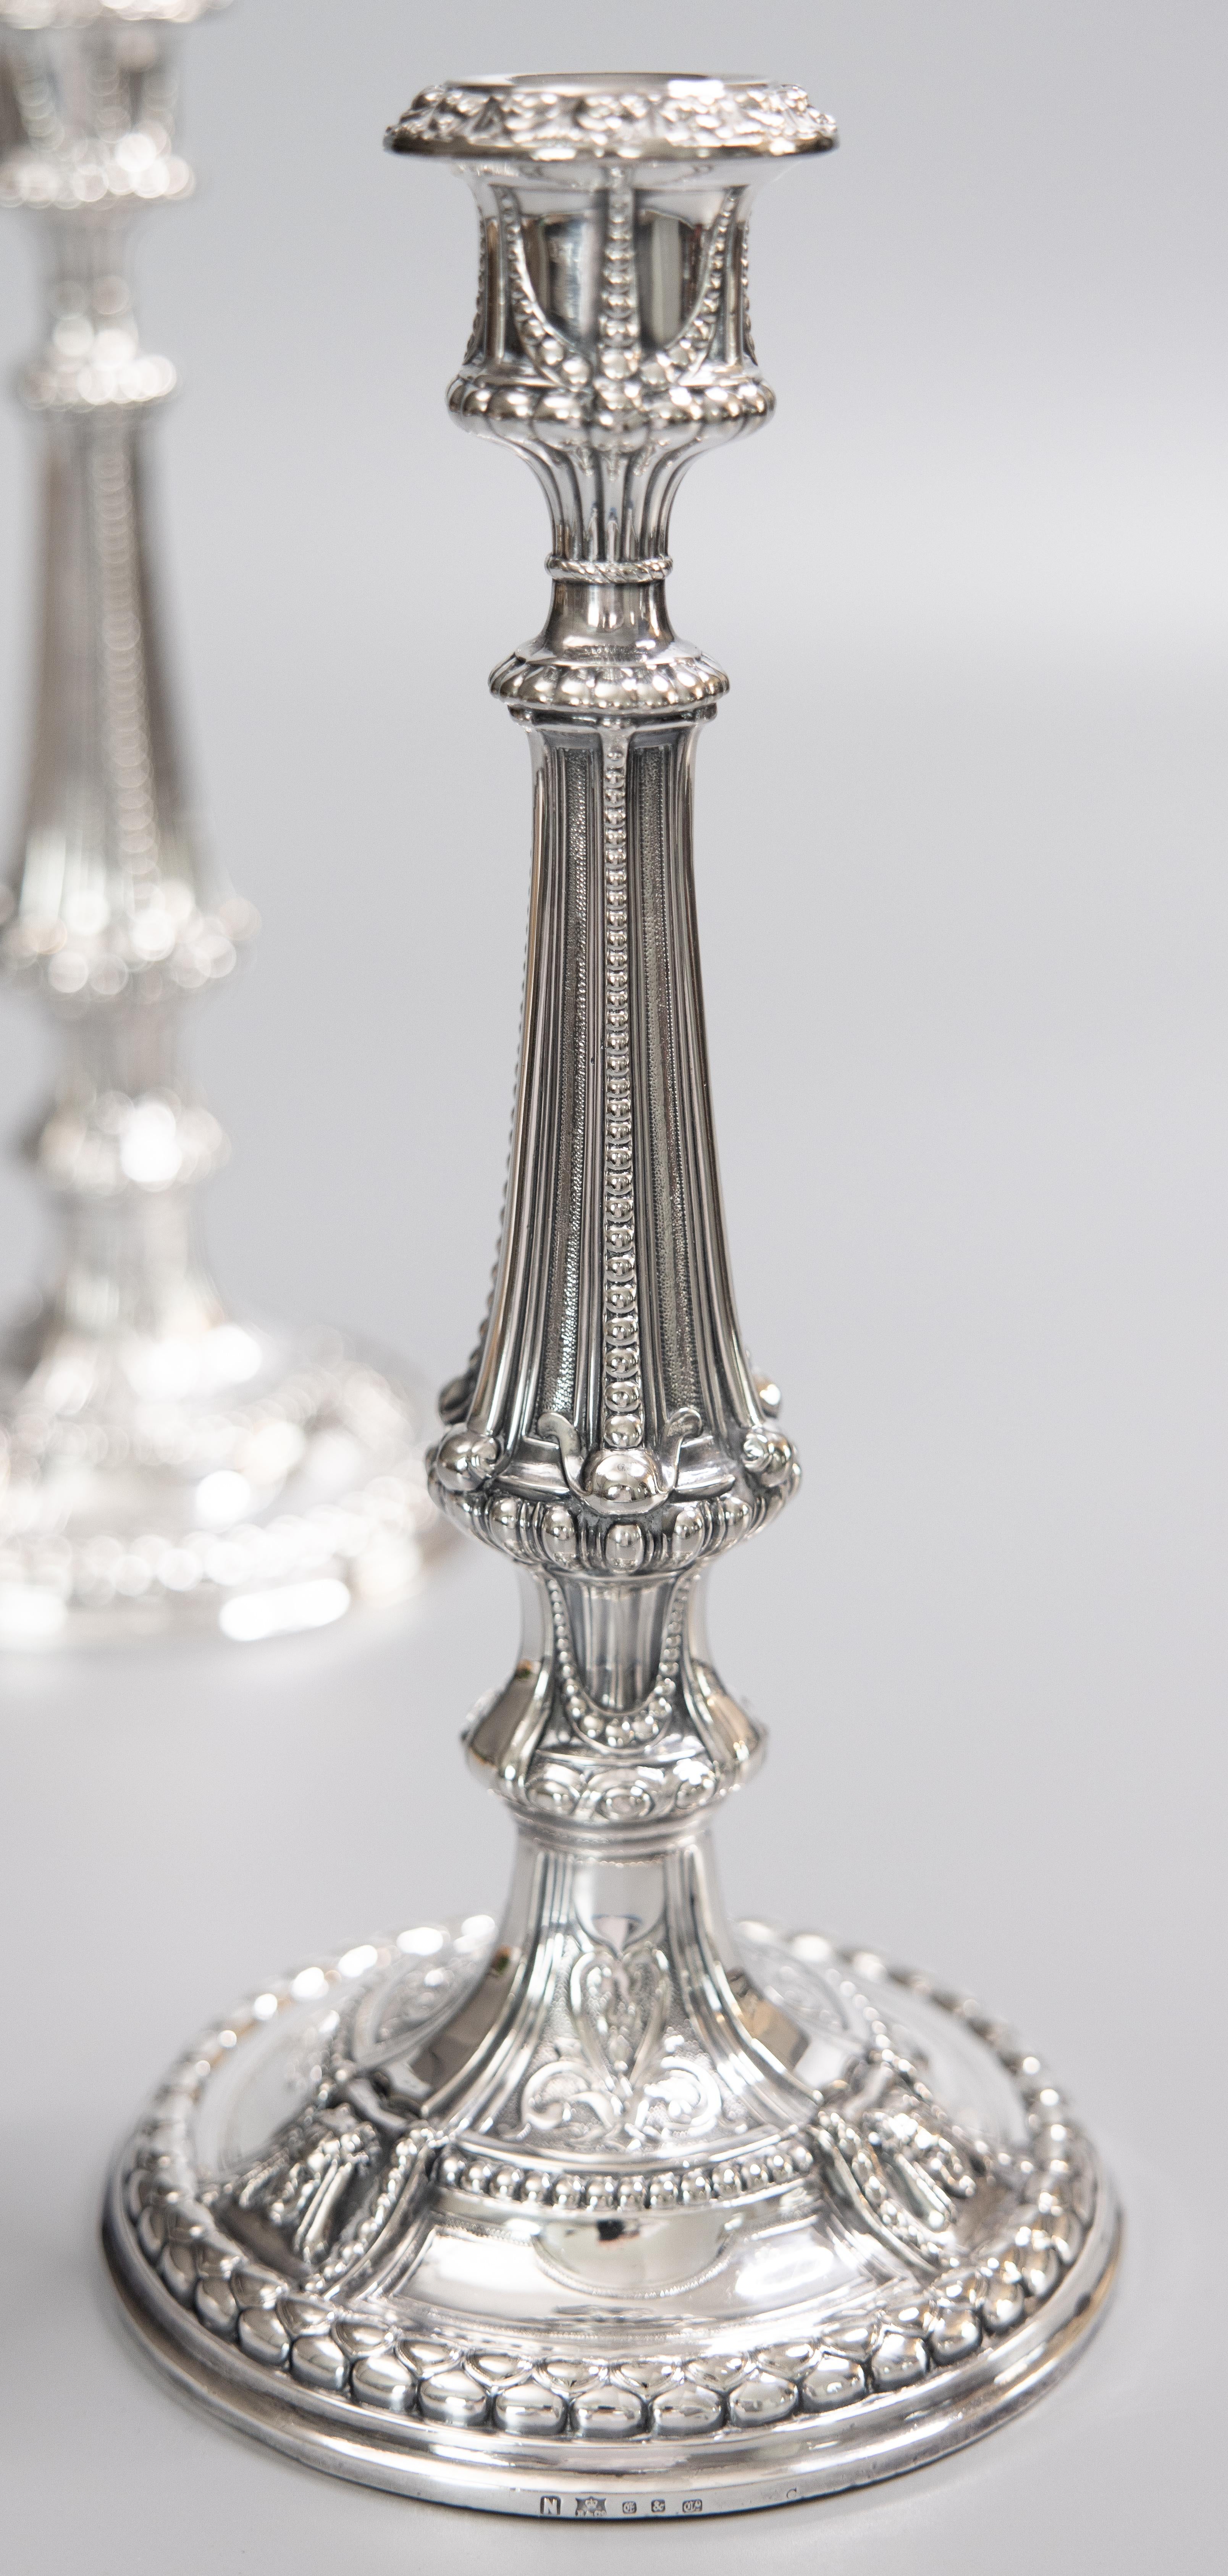 Pair of Antique English Elkington Neoclassical Silver Plate Candlesticks c. 1899 In Good Condition For Sale In Pearland, TX